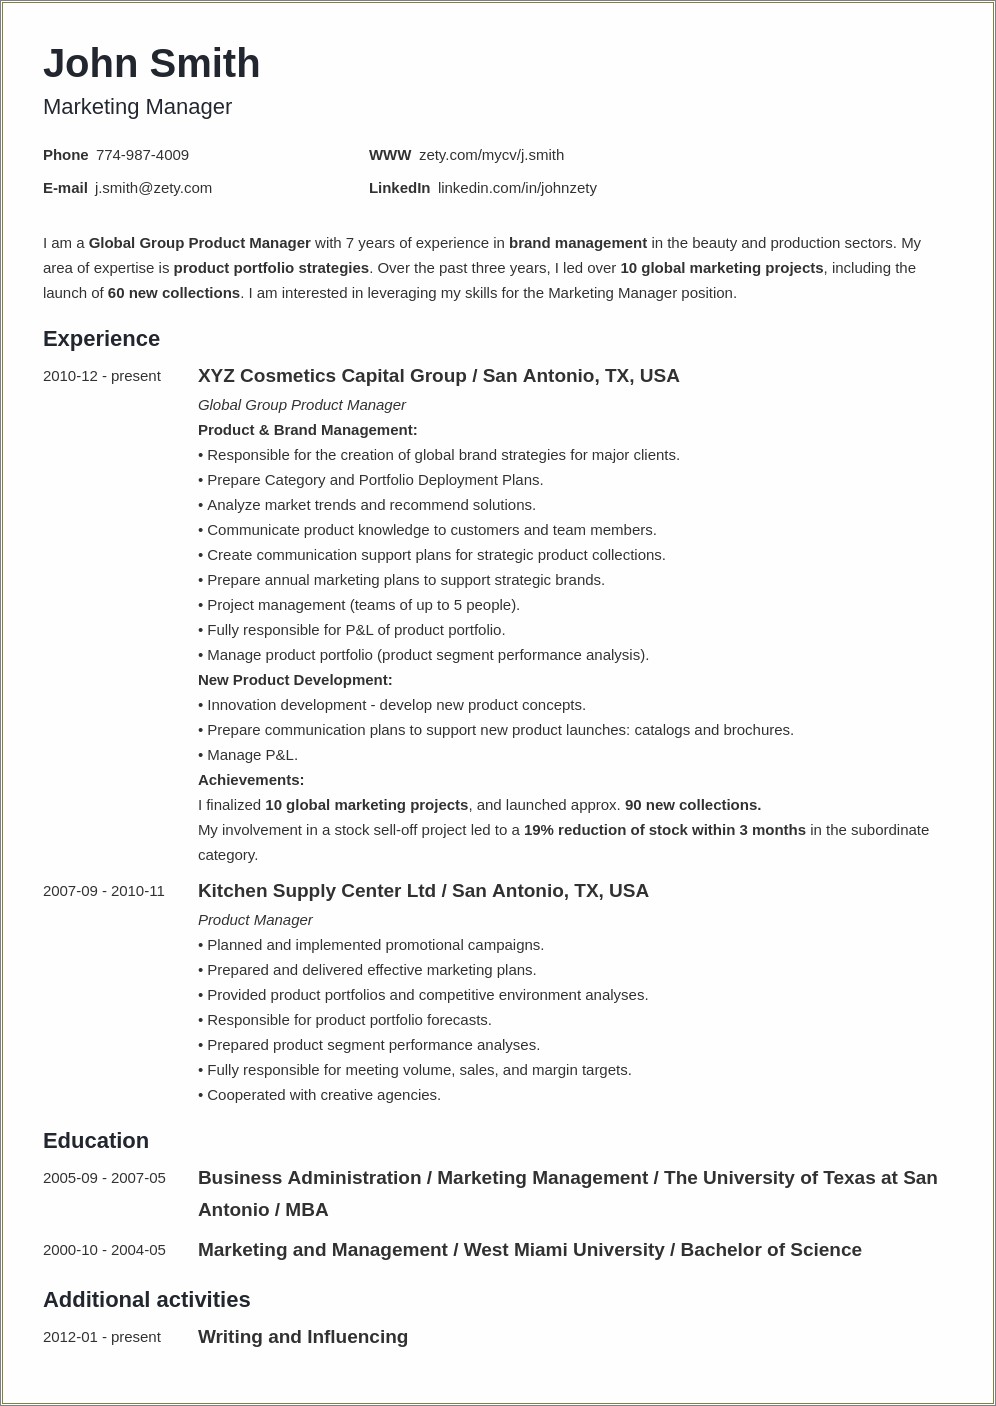 Examples Of College Education On Resume